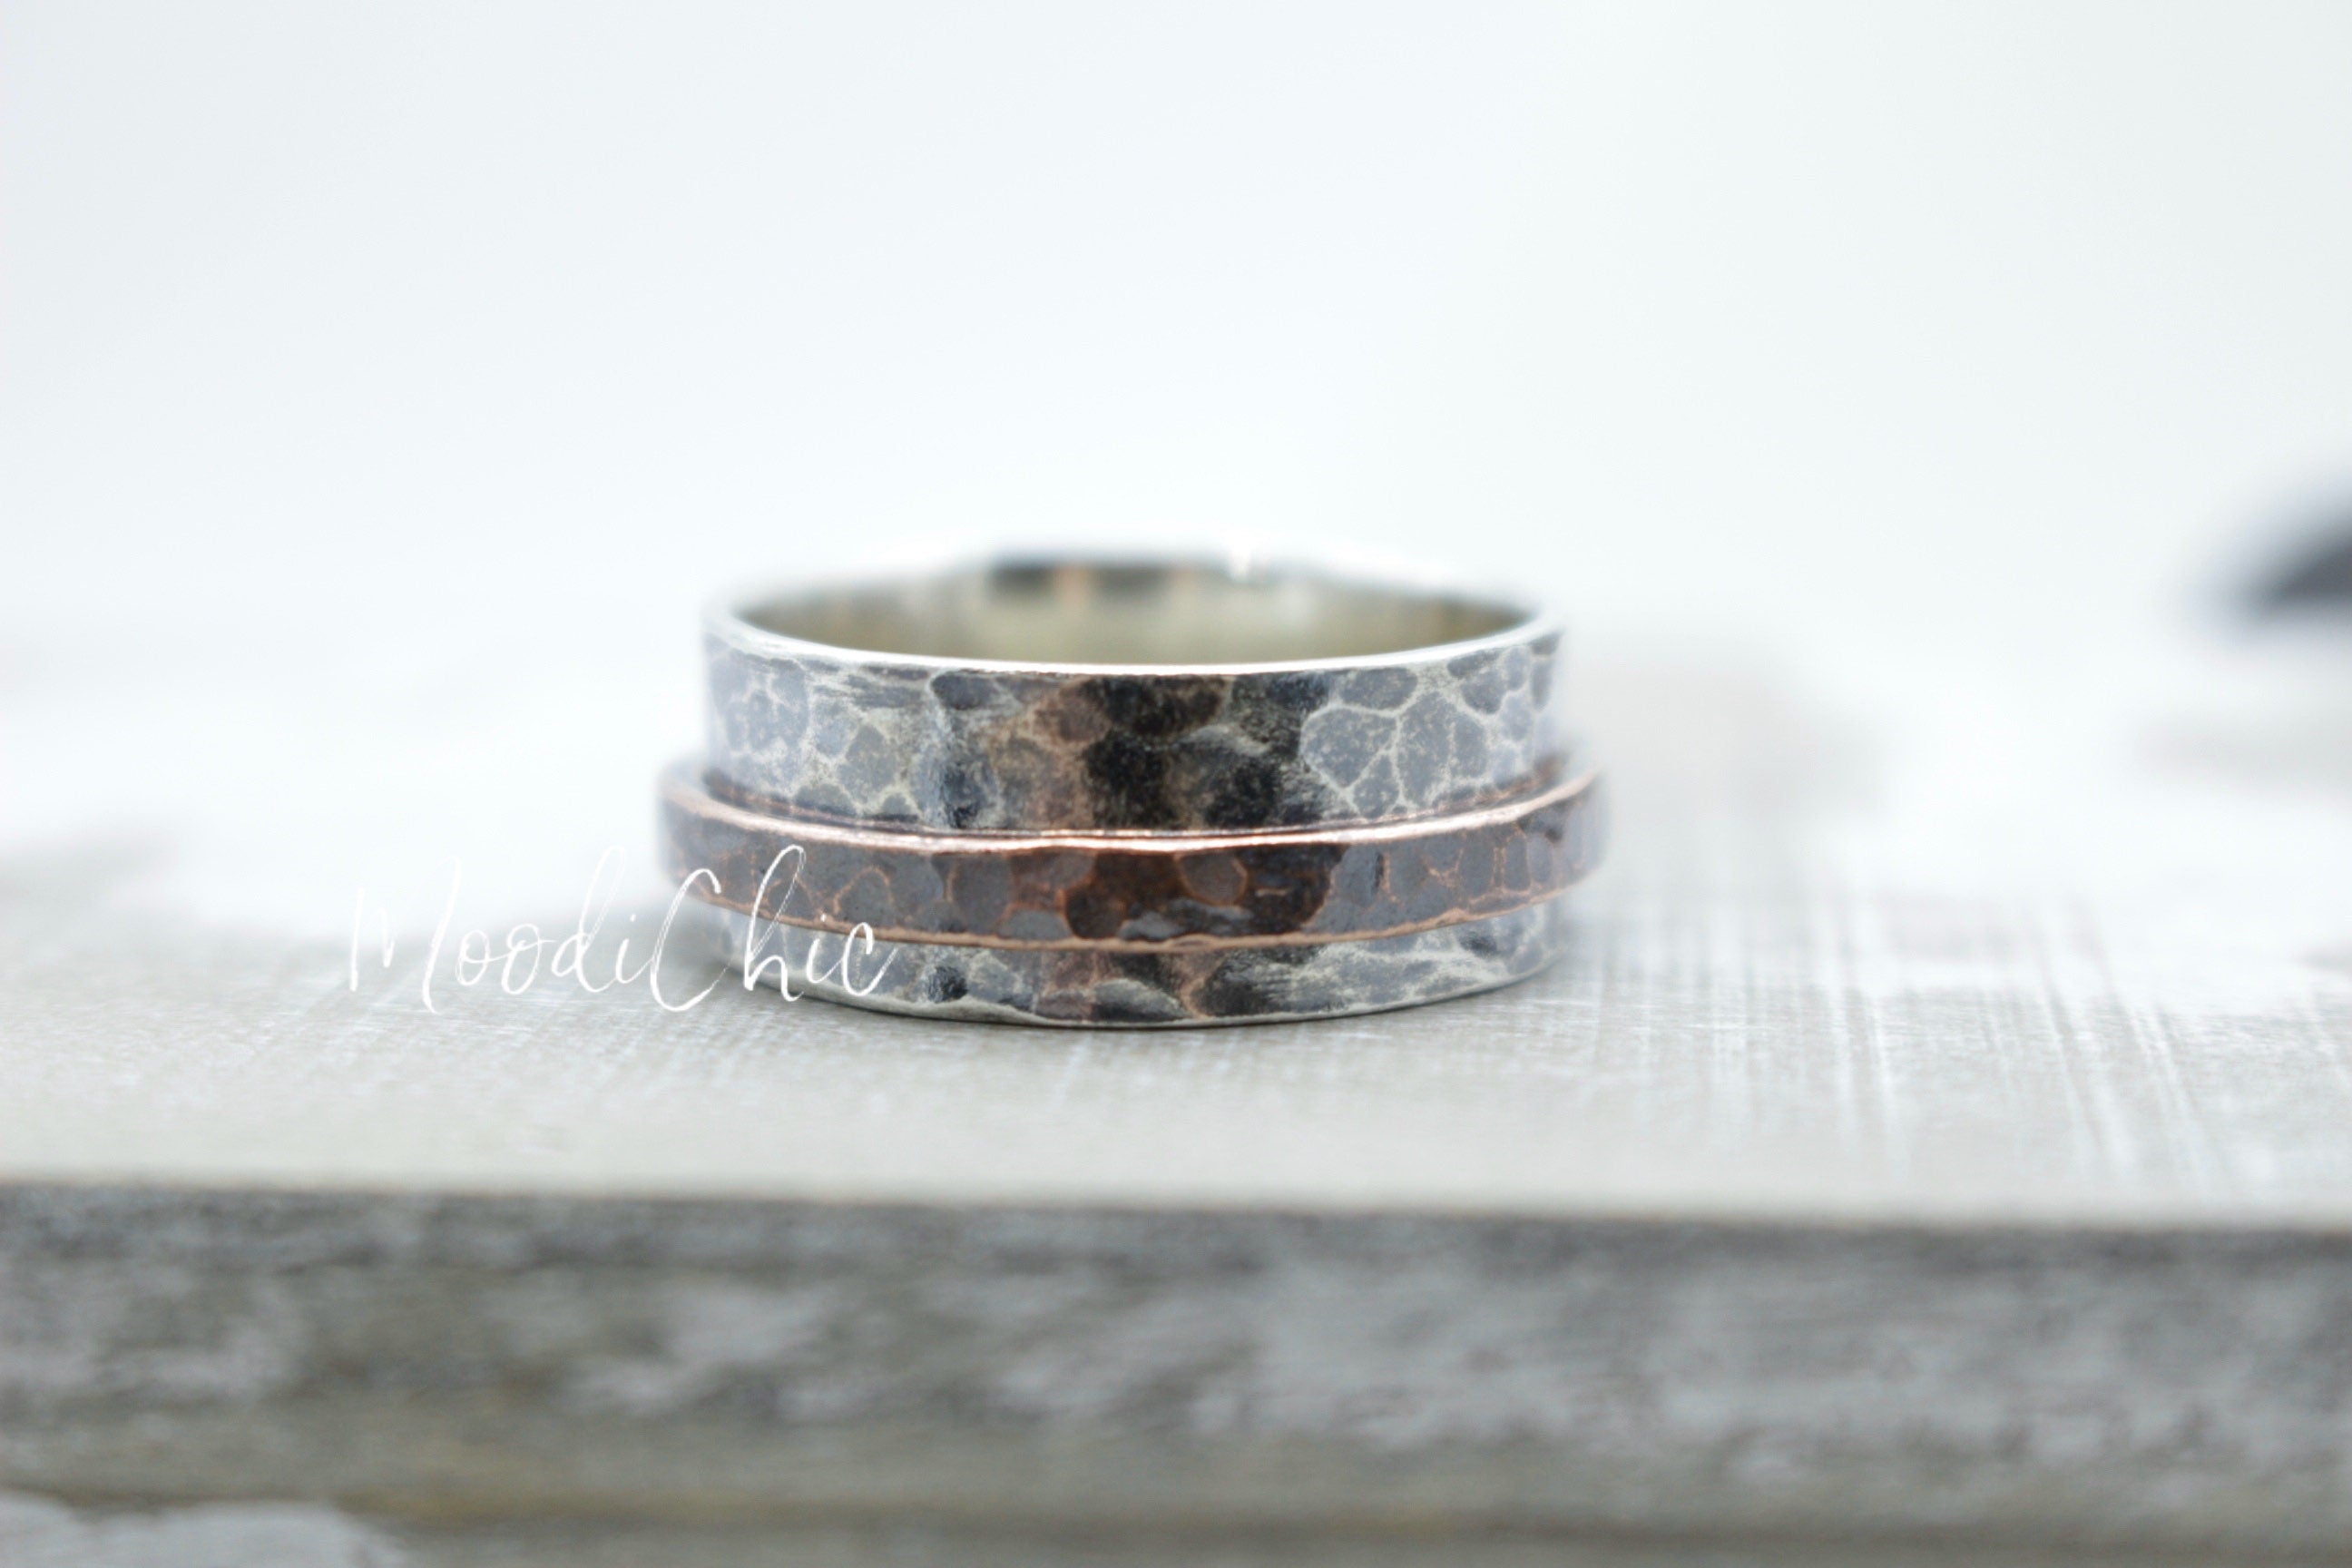 Rustic Copper spinner ring - Wide band Ring - Unisex Meditation Ring - Gift for her - Gift for him - Jewelry Sale